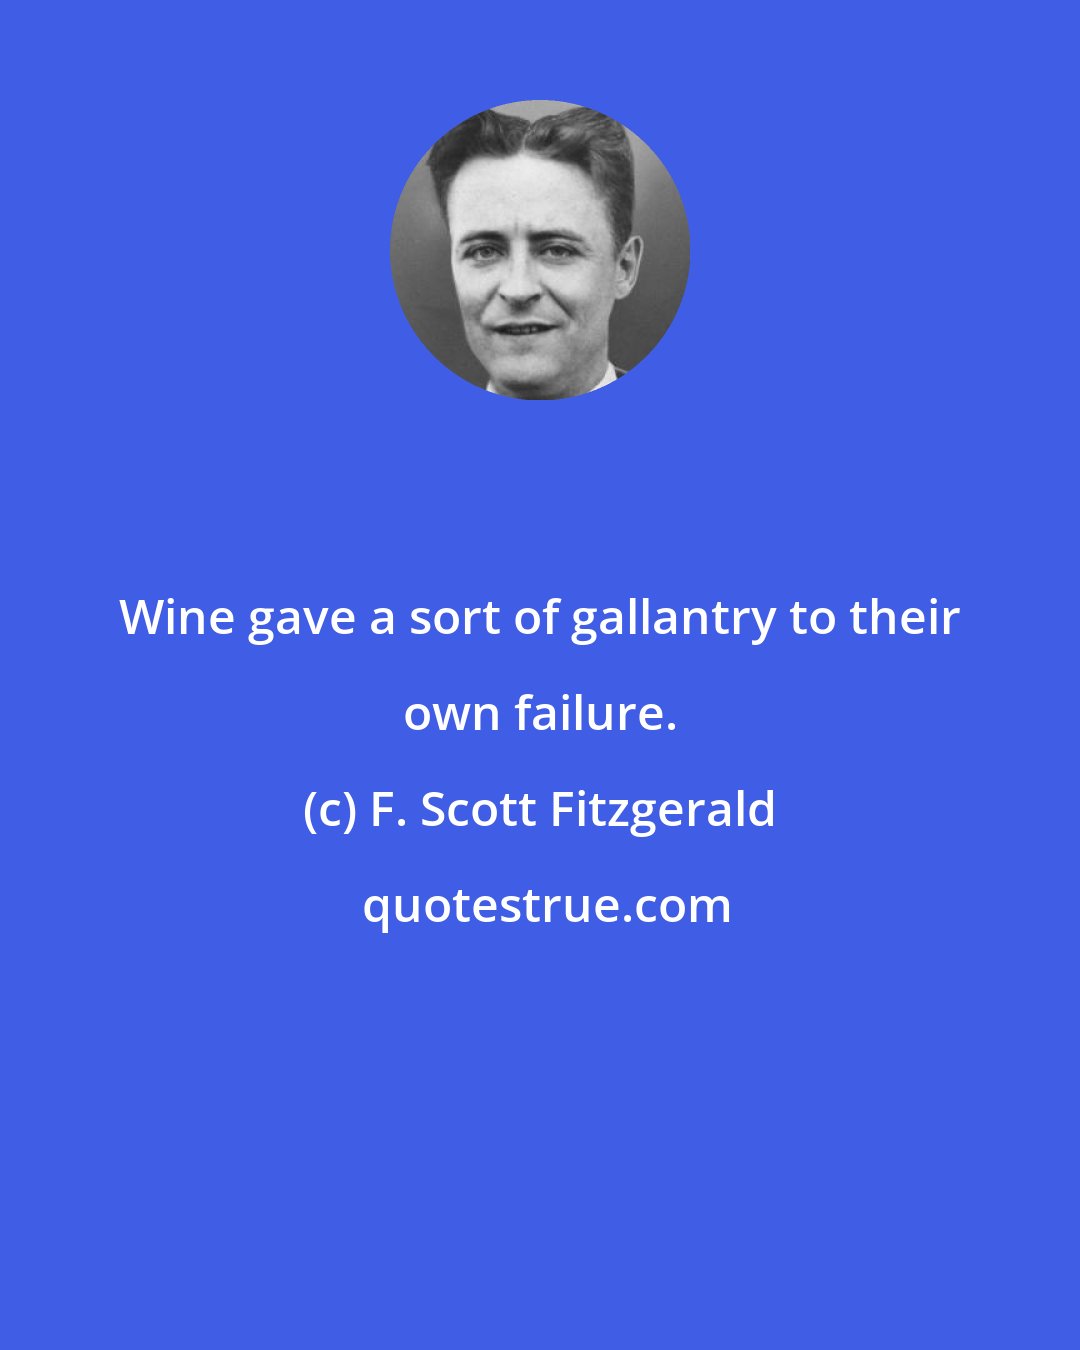 F. Scott Fitzgerald: Wine gave a sort of gallantry to their own failure.